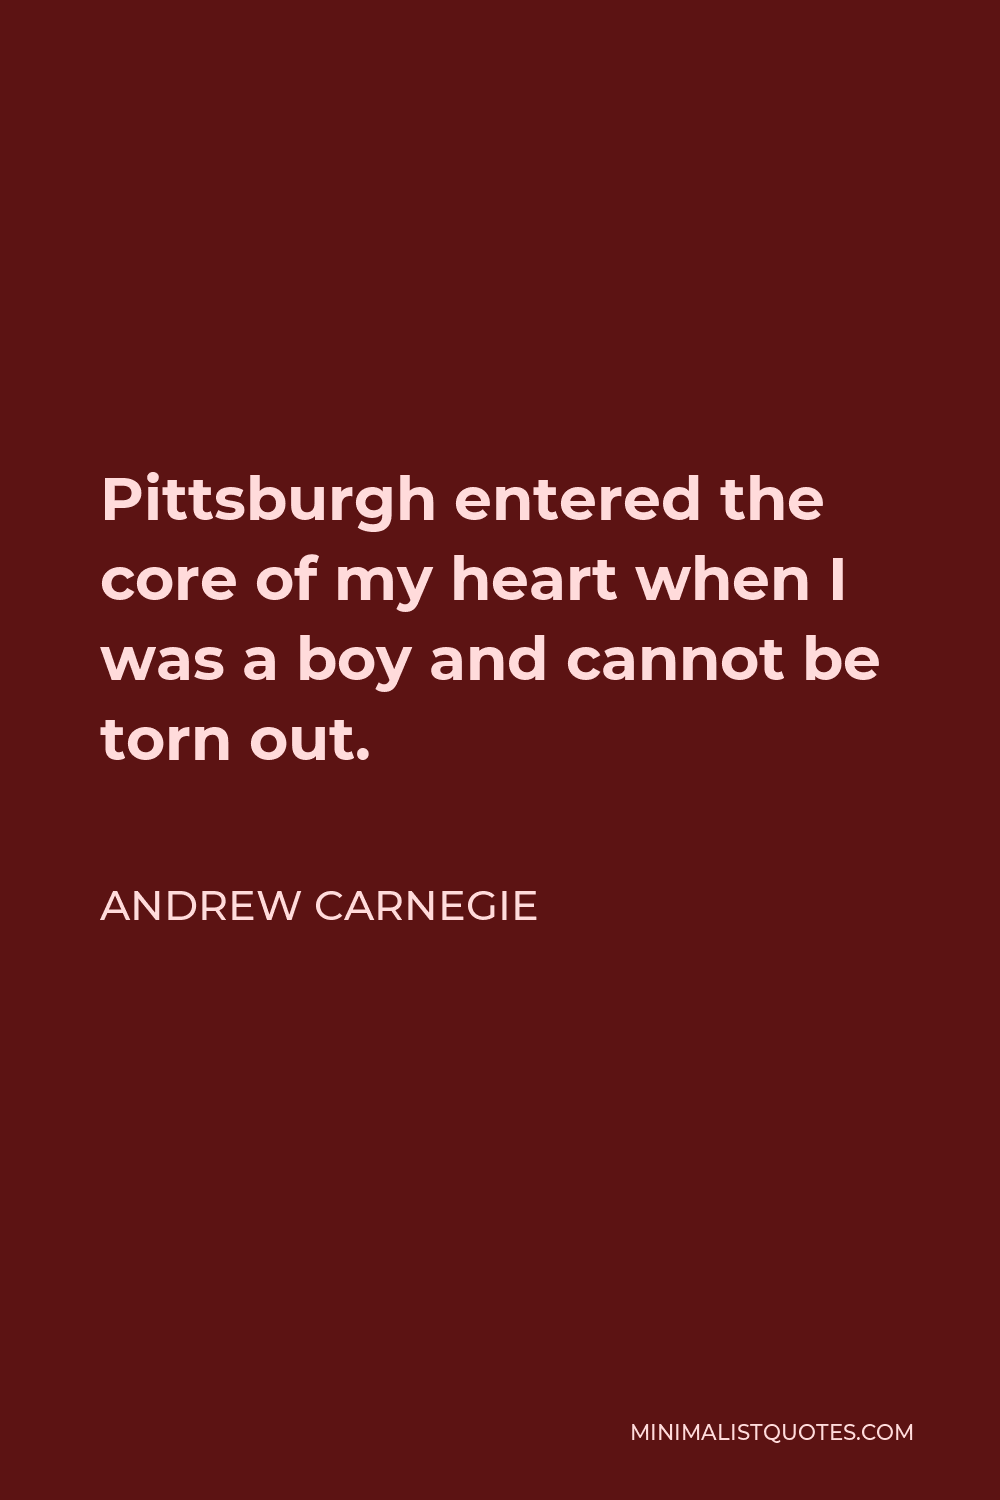 Andrew Carnegie Quote - Pittsburgh entered the core of my heart when I was a boy and cannot be torn out.